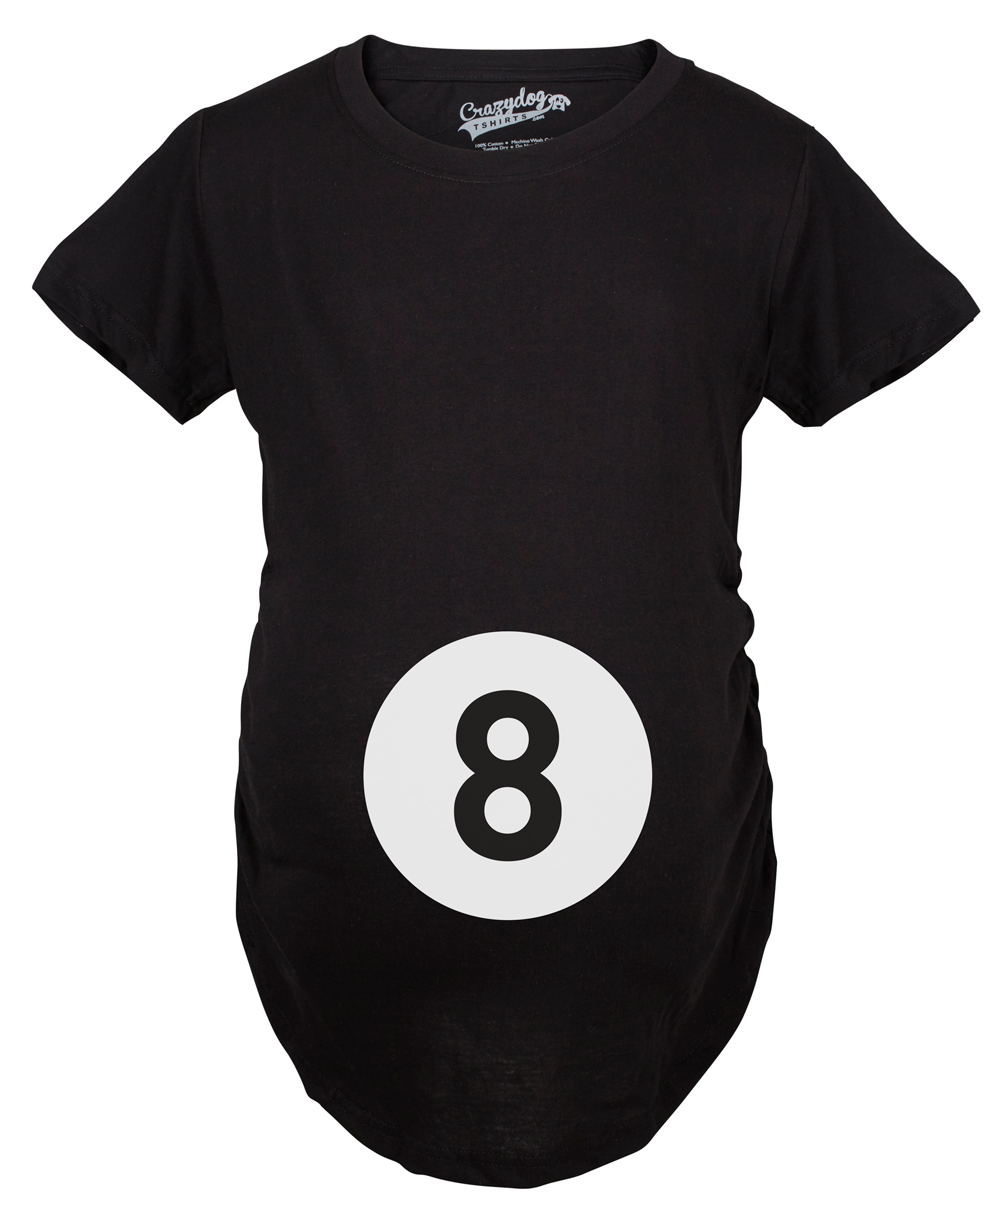 Crazy Dog Tshirts Maternity Eight Ball Funny Baby Announcement Shirt Belly Bump Cute Pregnancy Tee